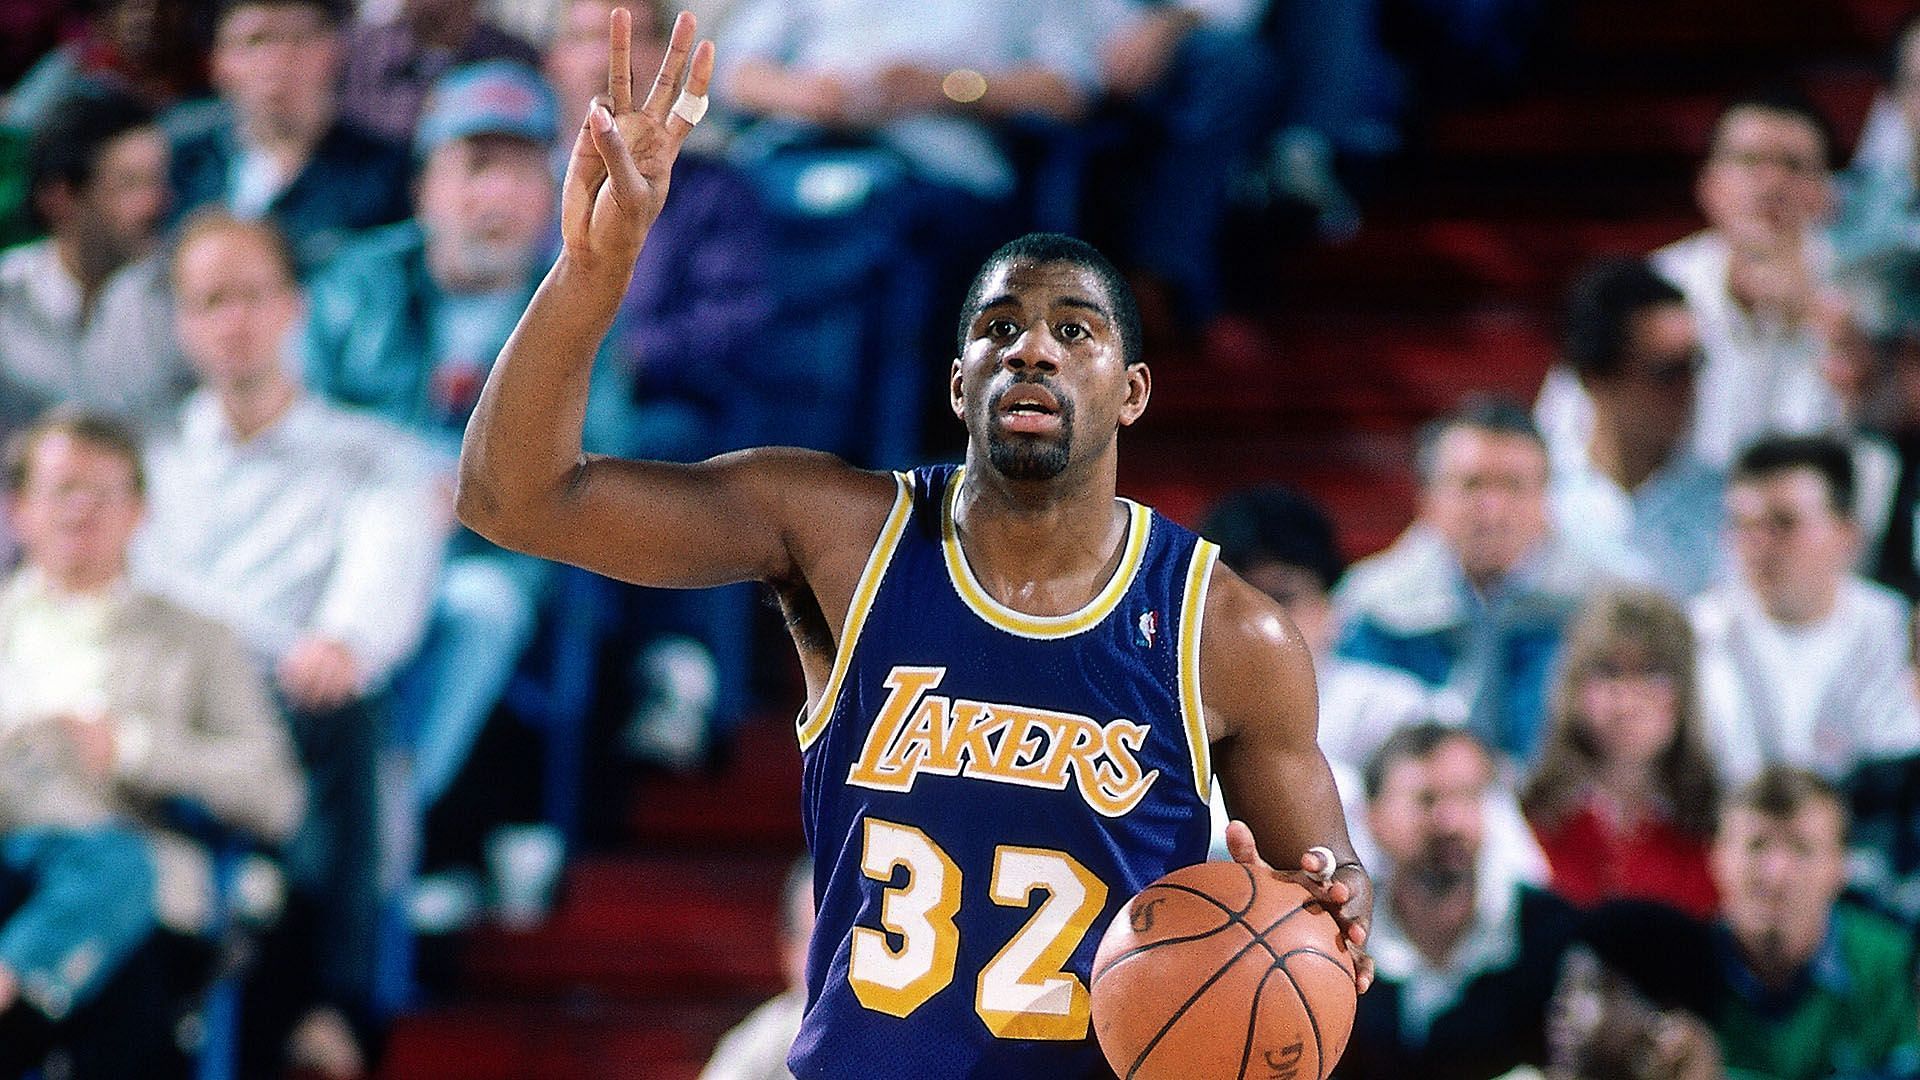 Magic Johnson is still considered by many to be the greatest point guard to play basketball. [Photo: NBA.com]